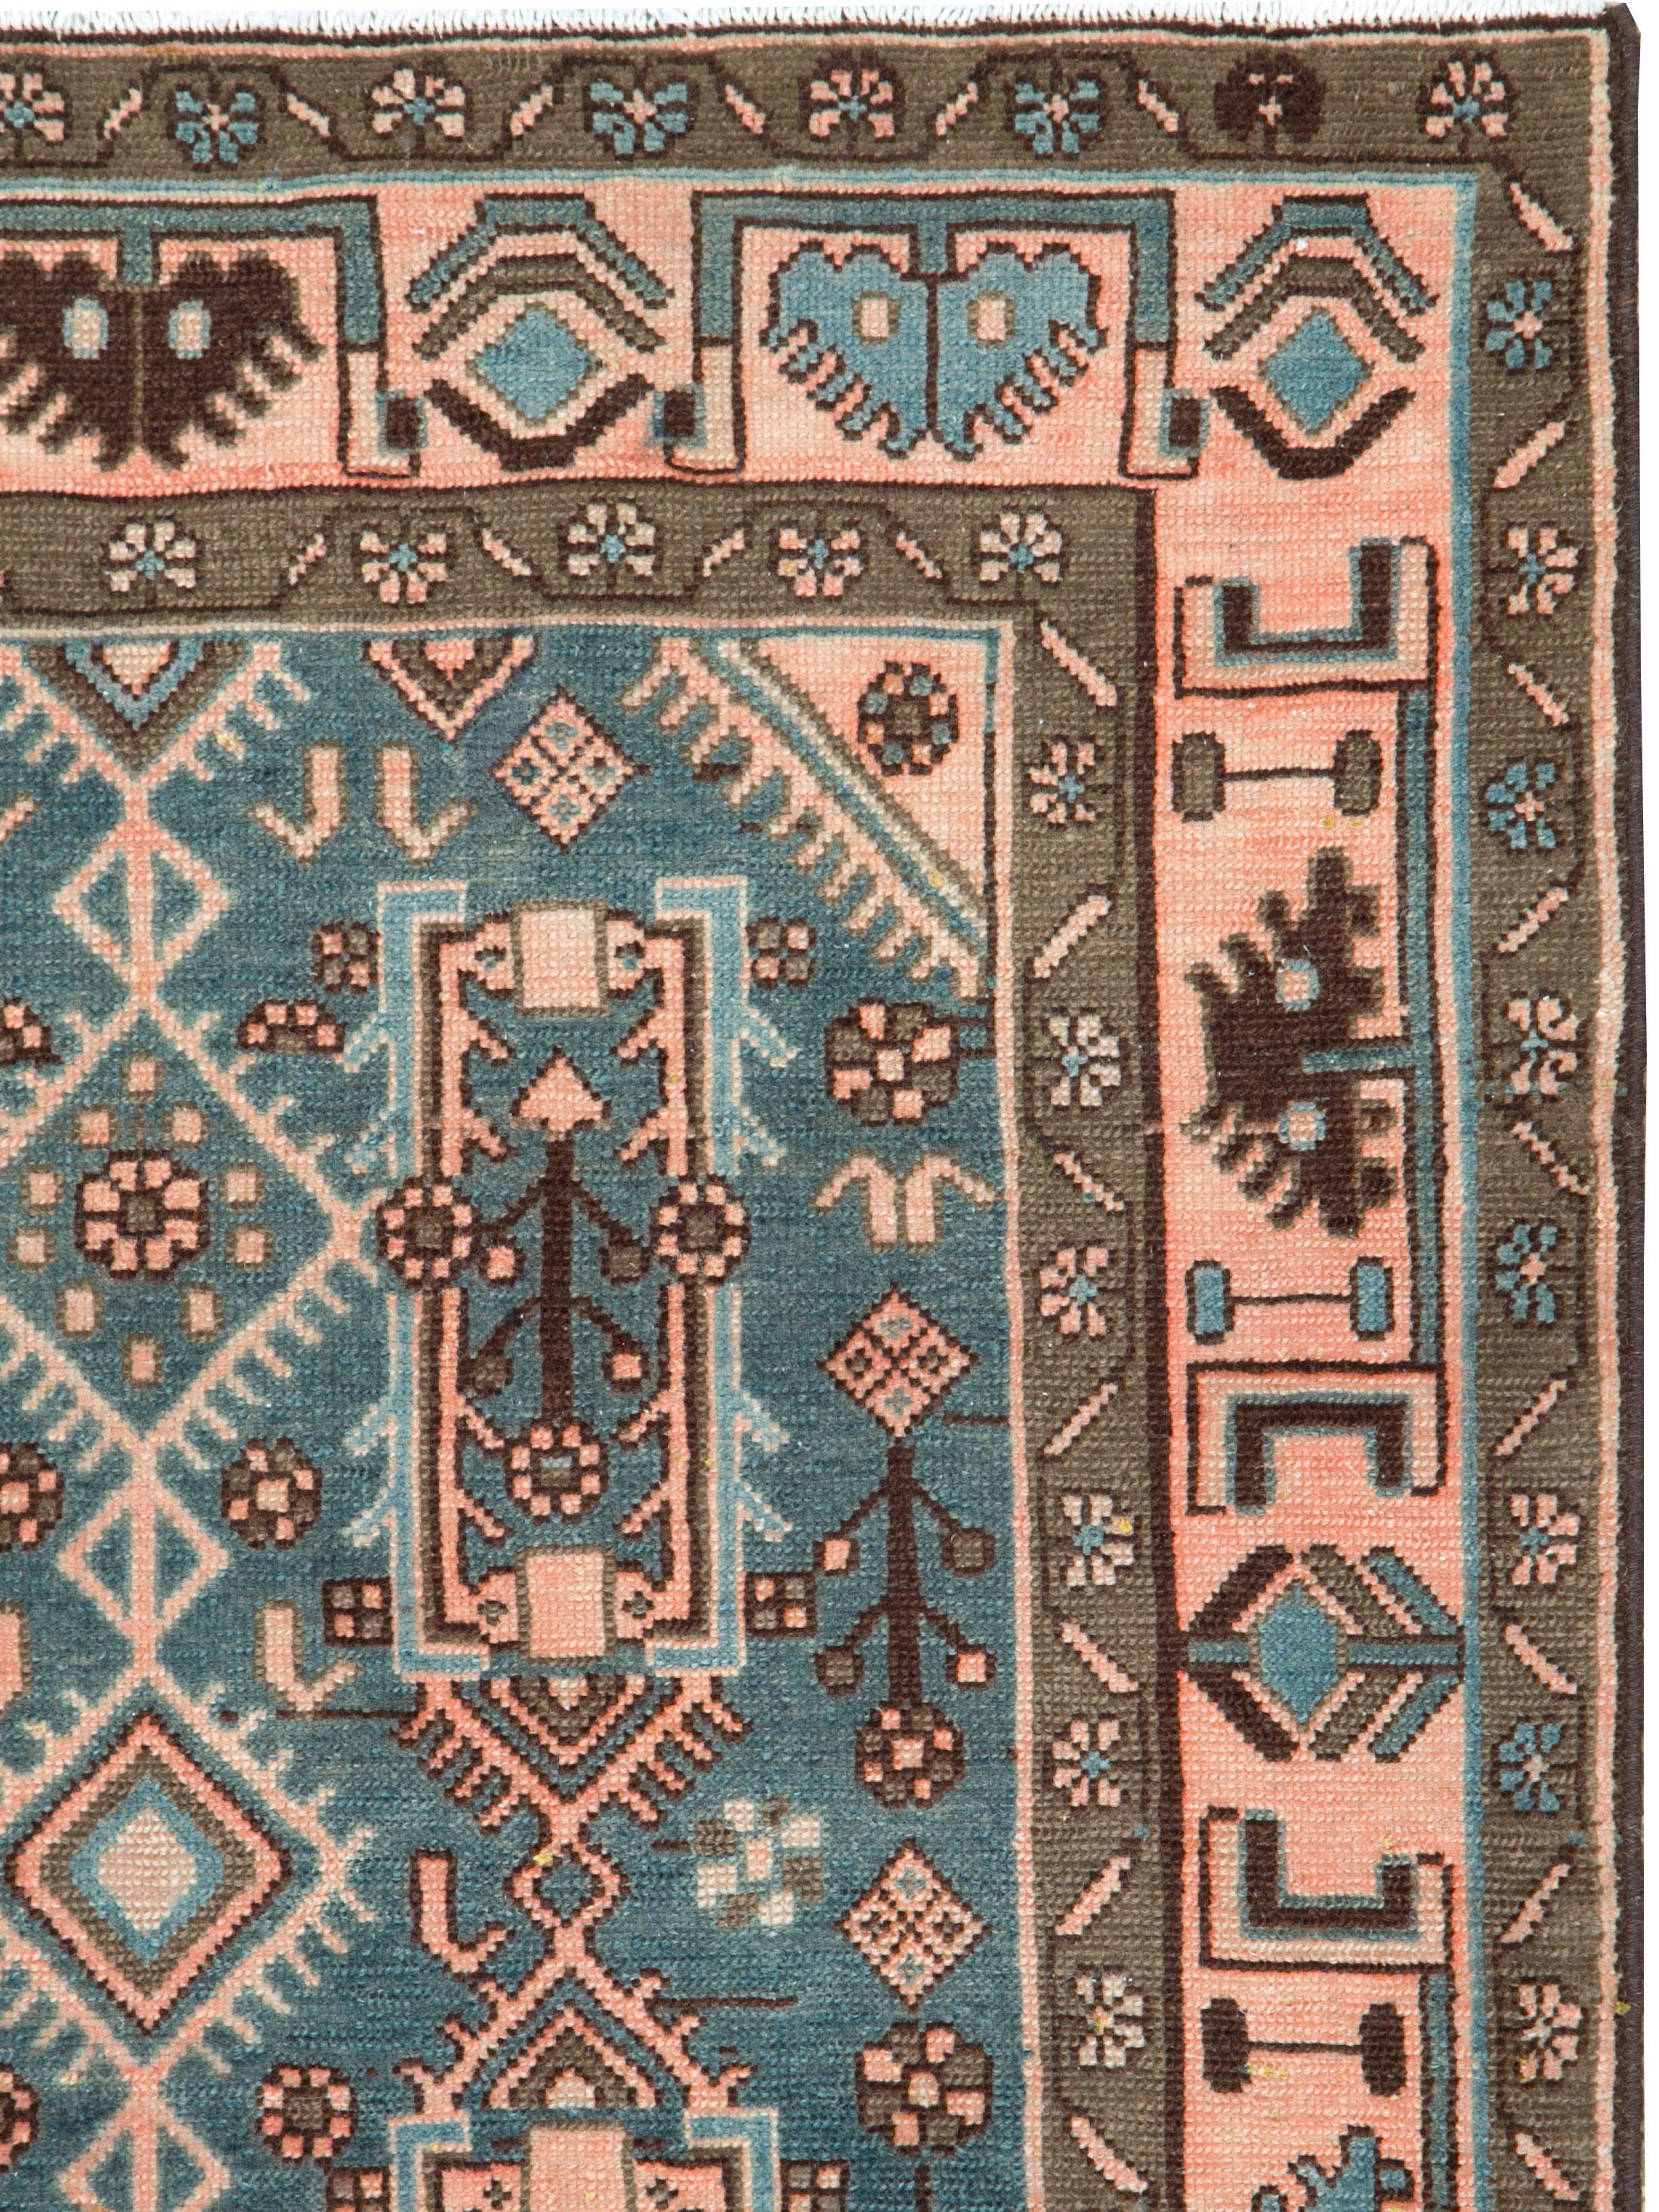 A vintage Persian Malayer carpet from the mid-20th century with a blue-green field and detailed in New York pink, and a border utilizing the same shades.